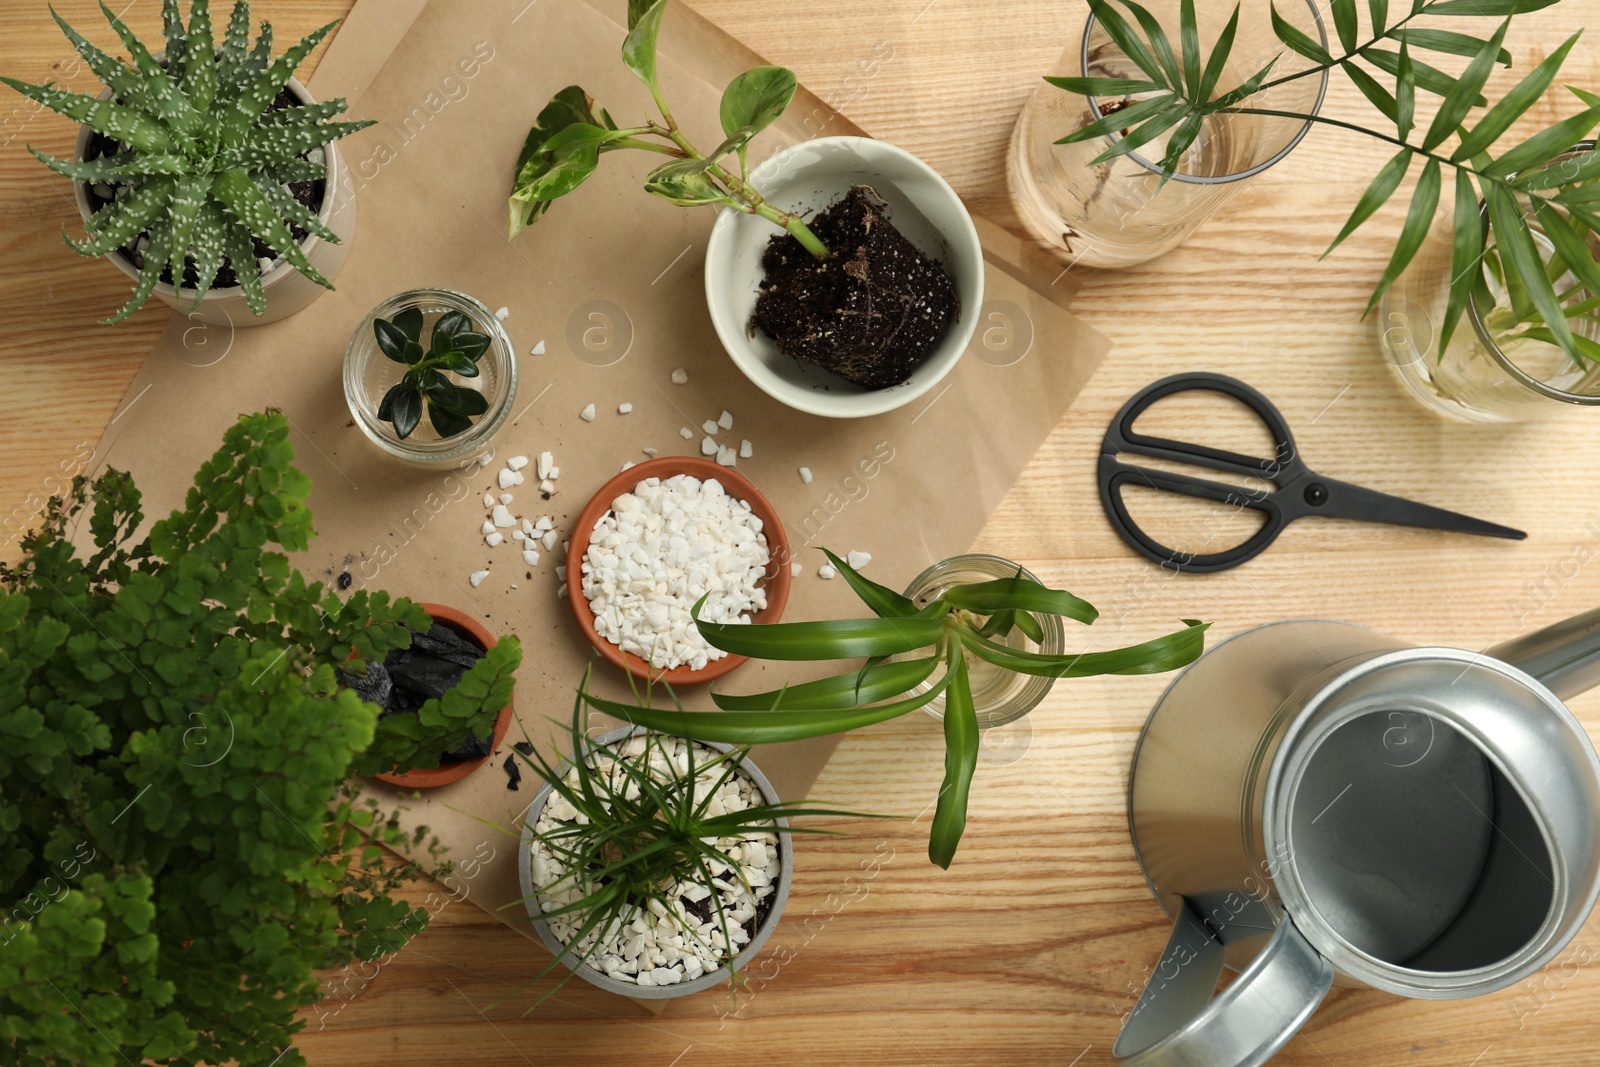 Photo of Flat lay composition with different house plants on wooden table